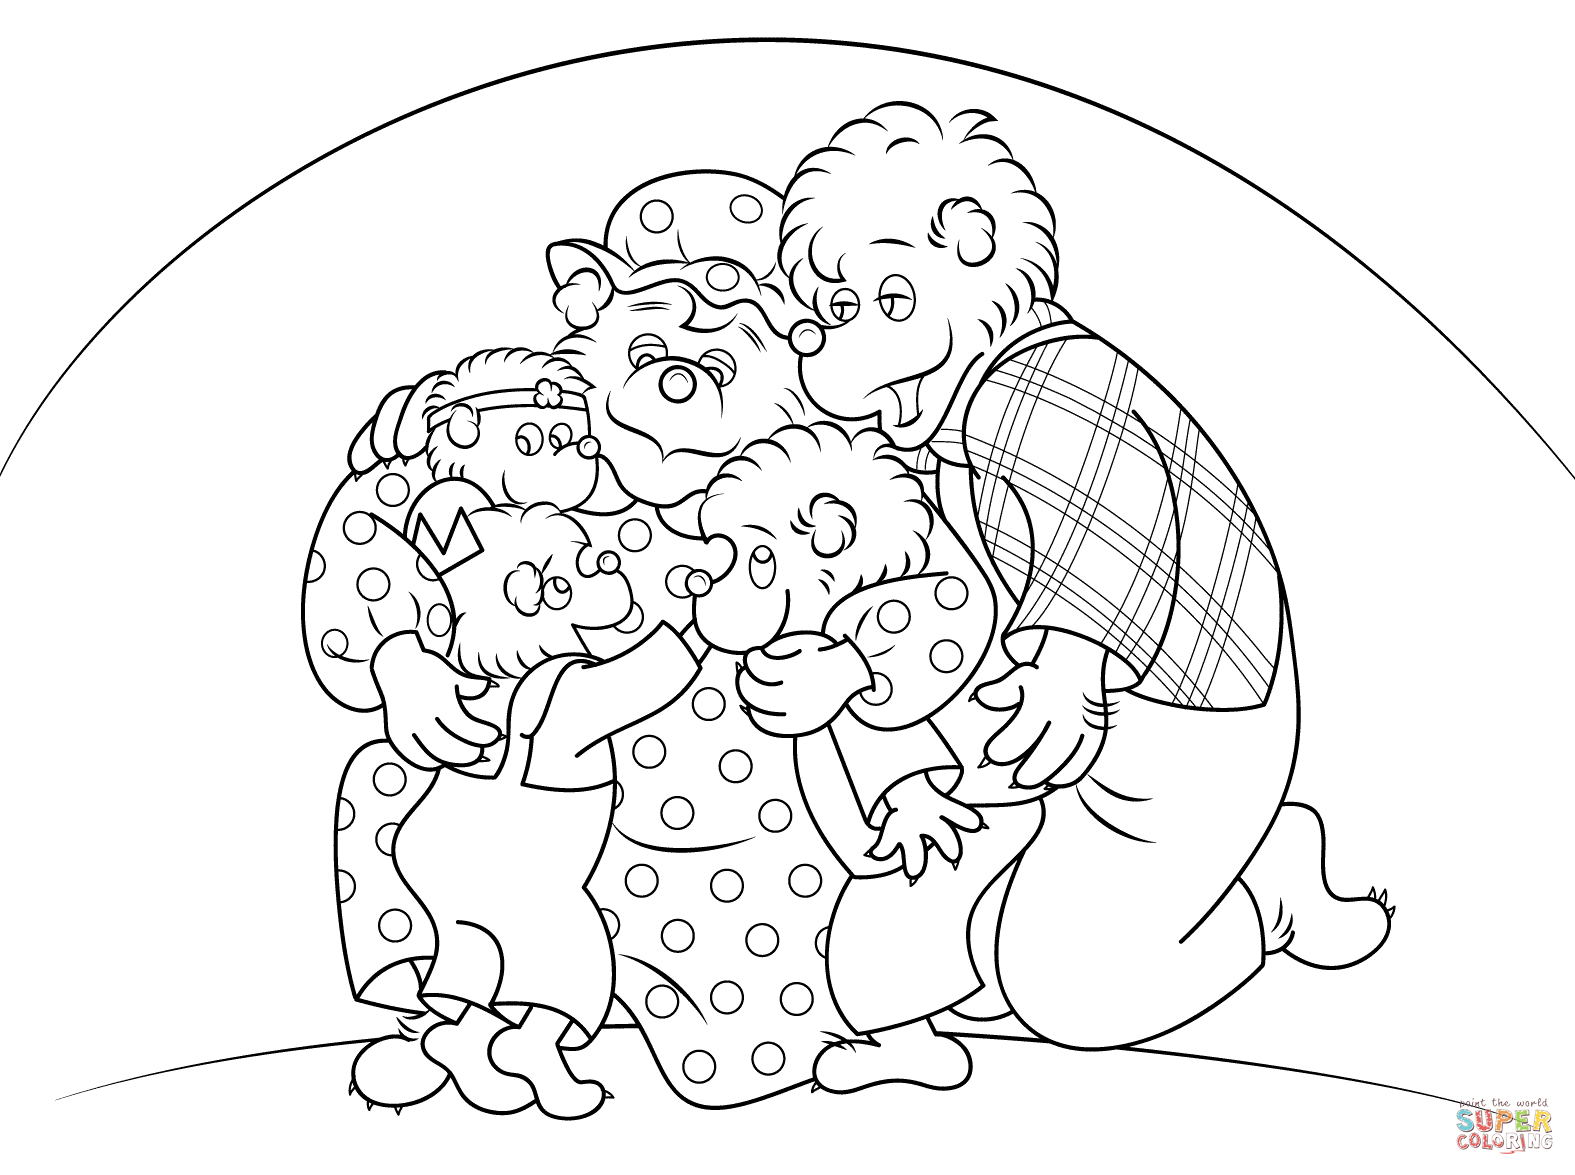 Berenstain Bears coloring page | Free Printable Coloring Pages